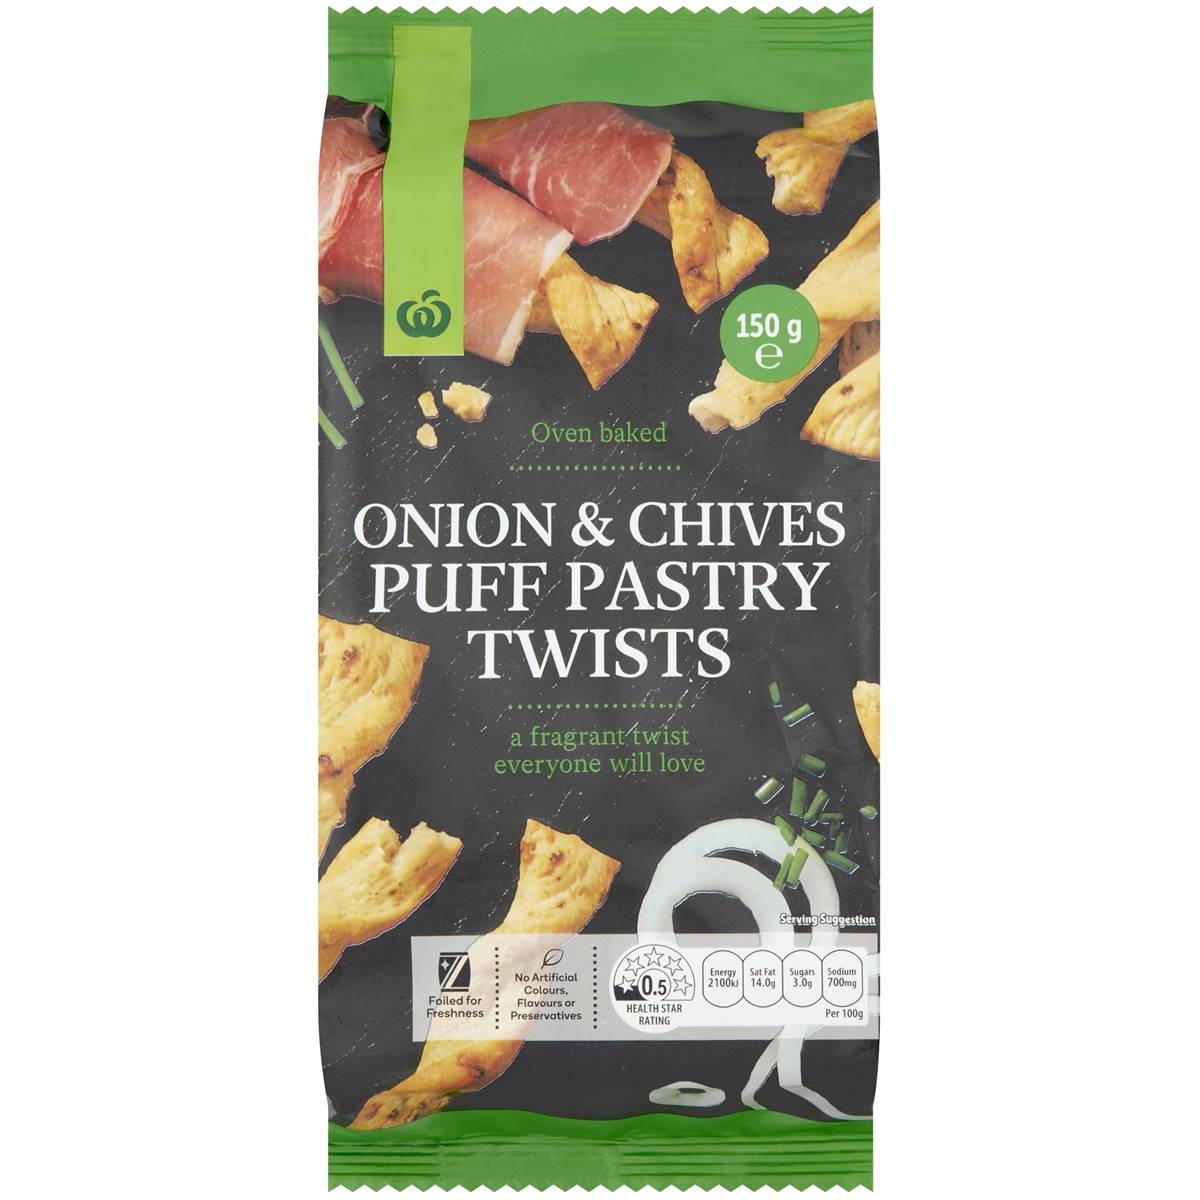 Calories in Woolworths Onion & Chives Puff Pastry Twists